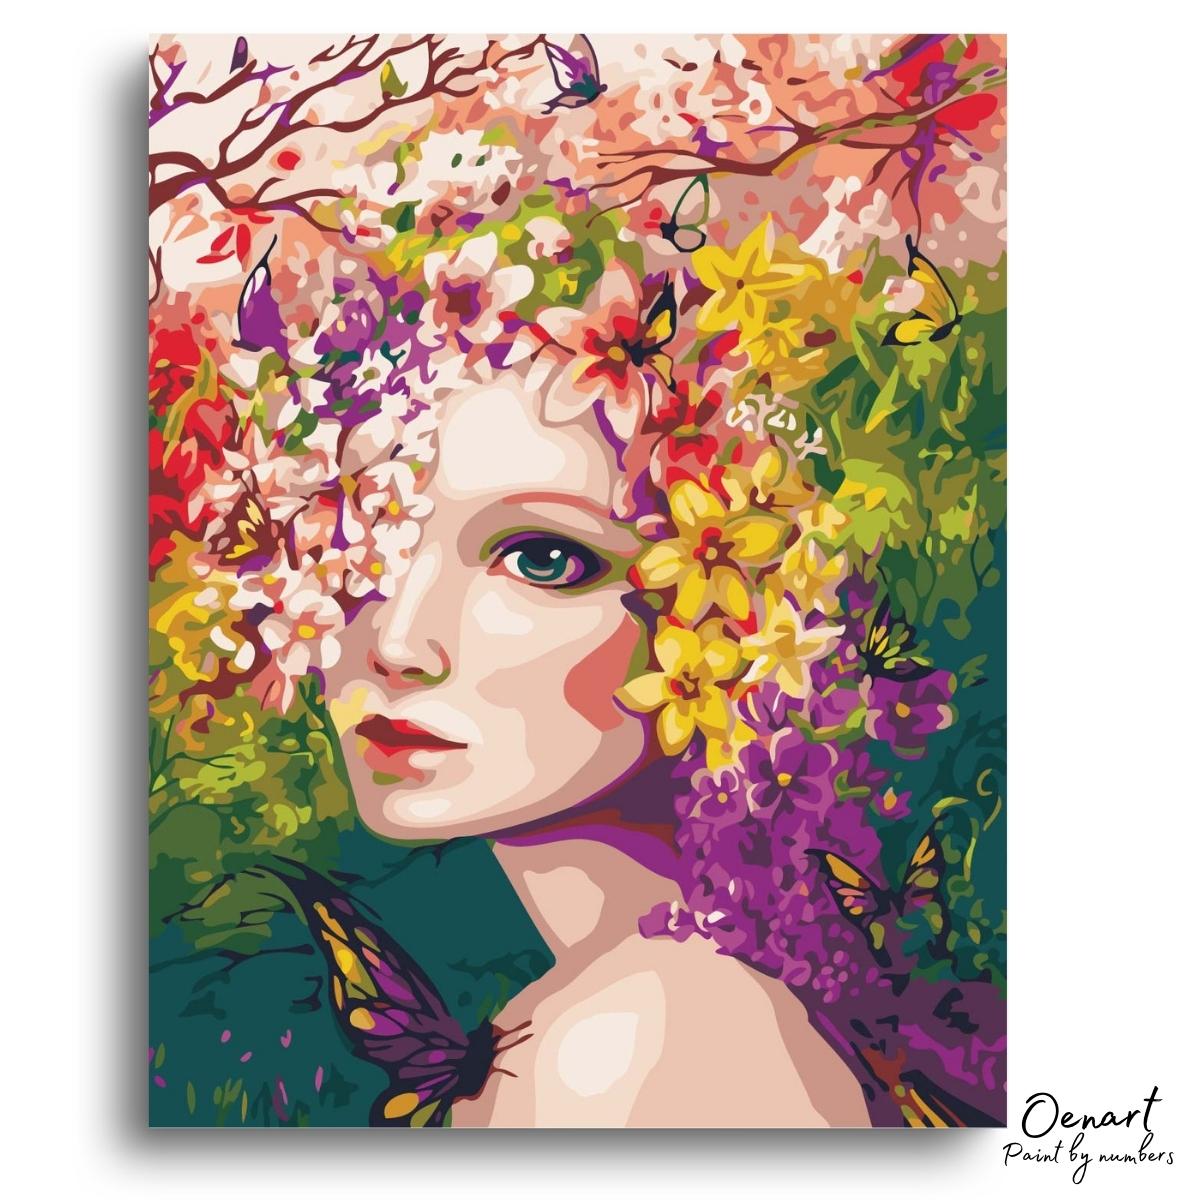 Lady Flower - Paint By Numbers Kit